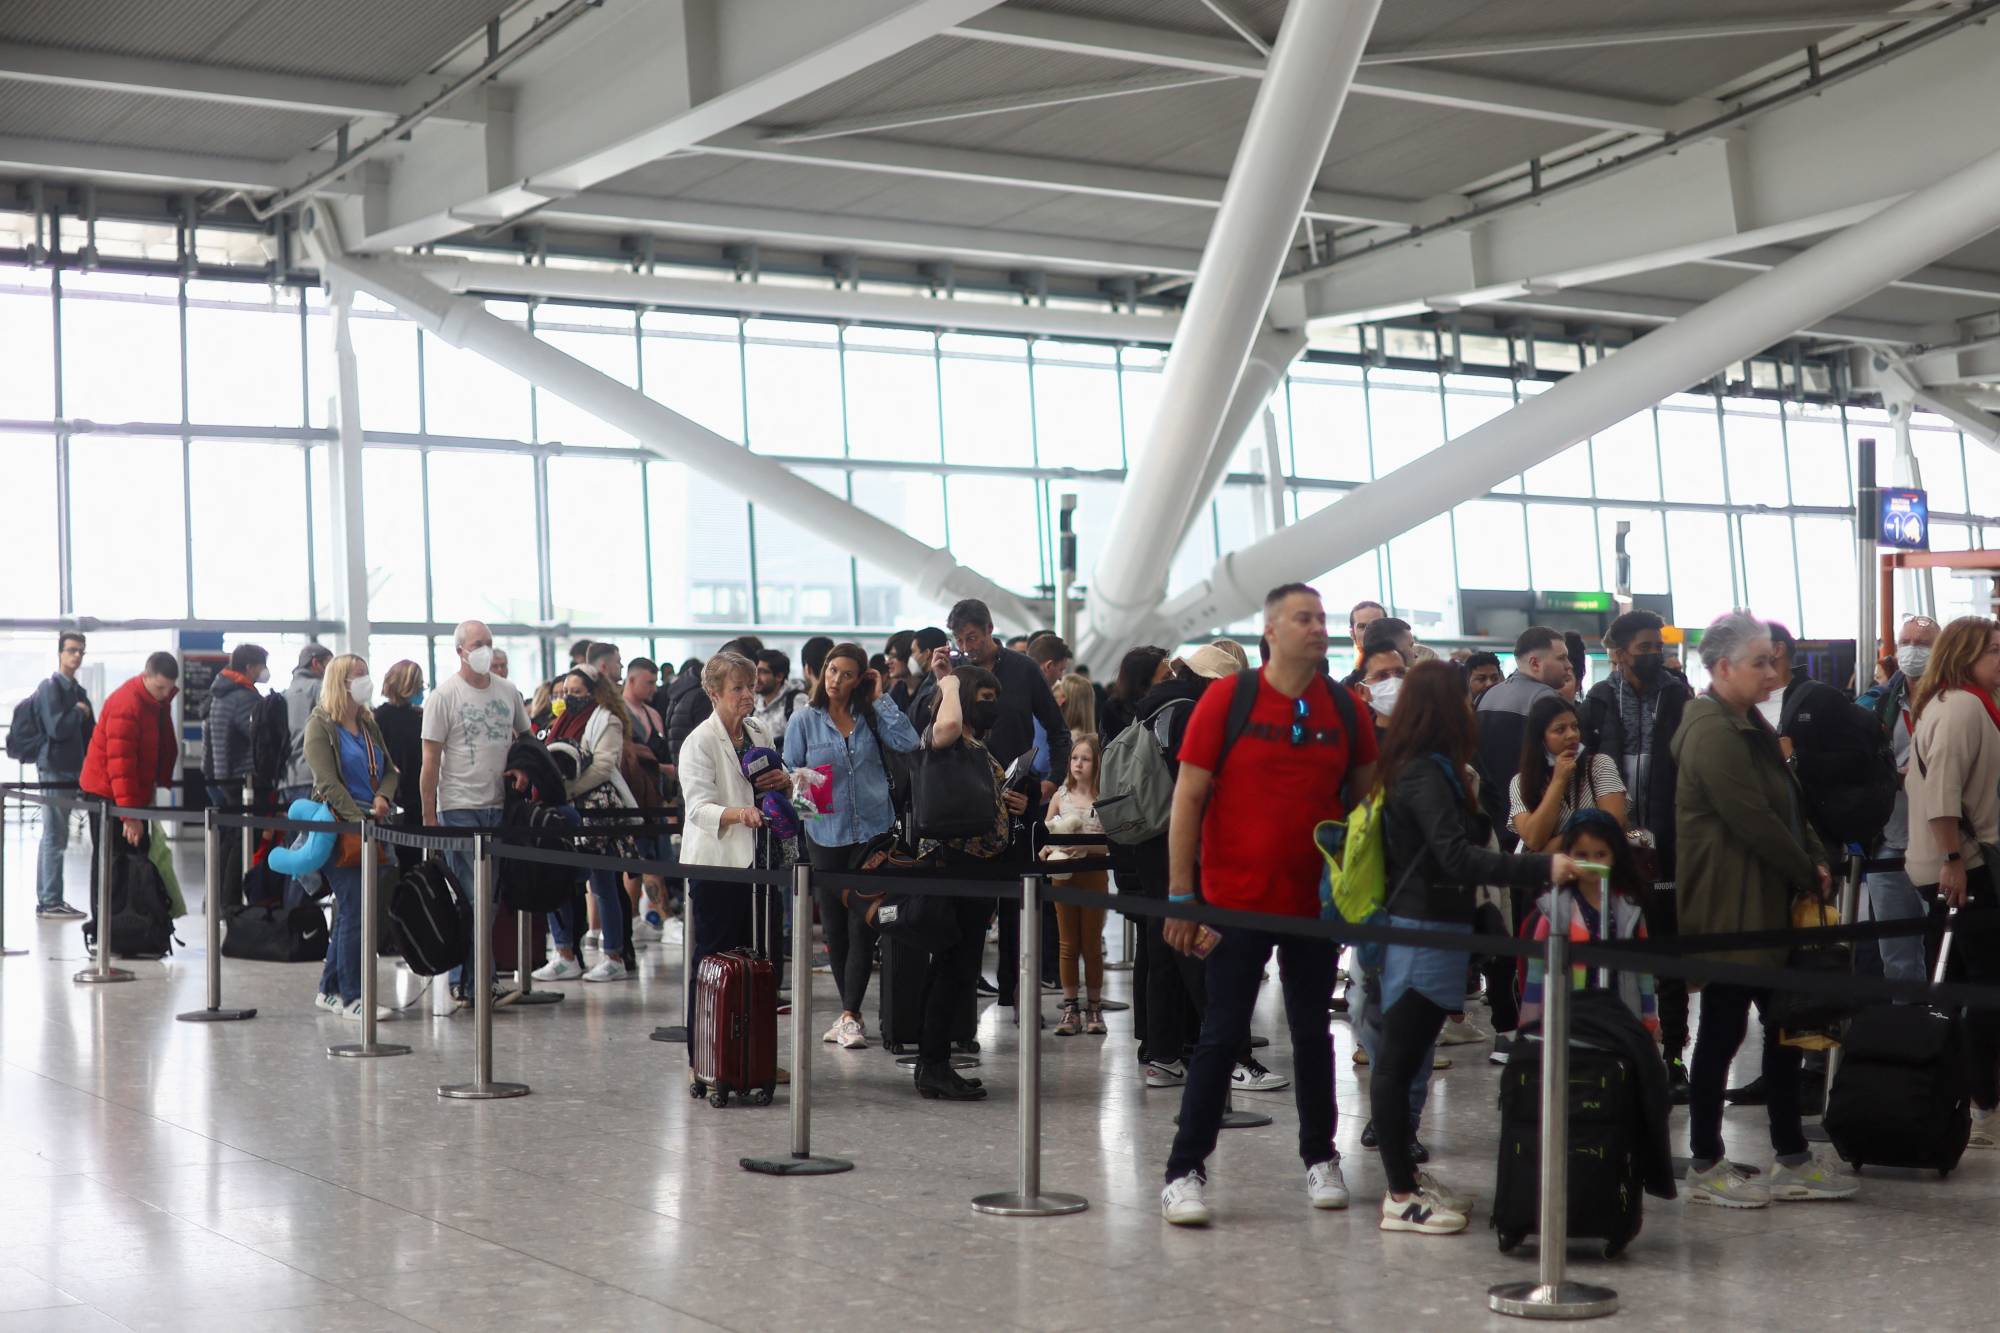 Lines formed at Heathrow Airport’s Terminal 5 in advance of the Easter holiday as the number of travelers surged. | HANNAH MCKAY / REUTERS